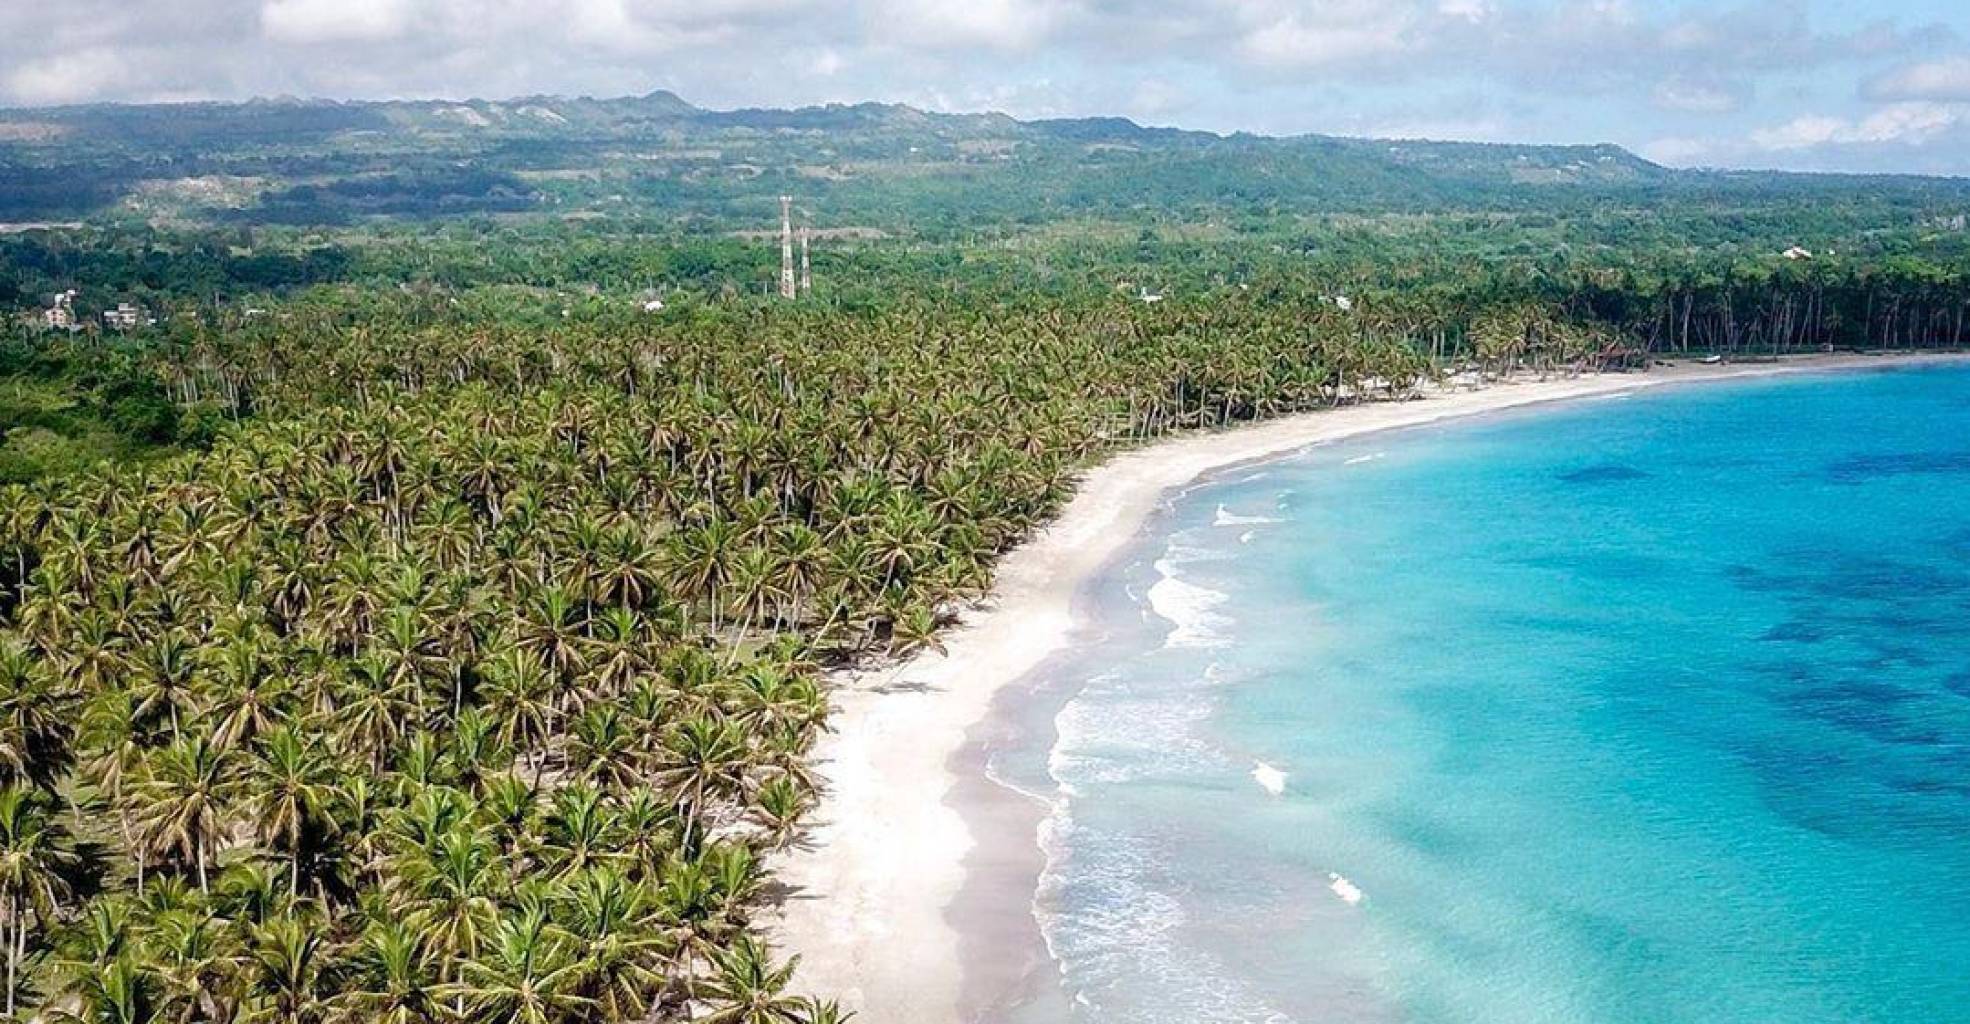 Five Beautiful Beaches In The Dominican Republic That You Must Visit